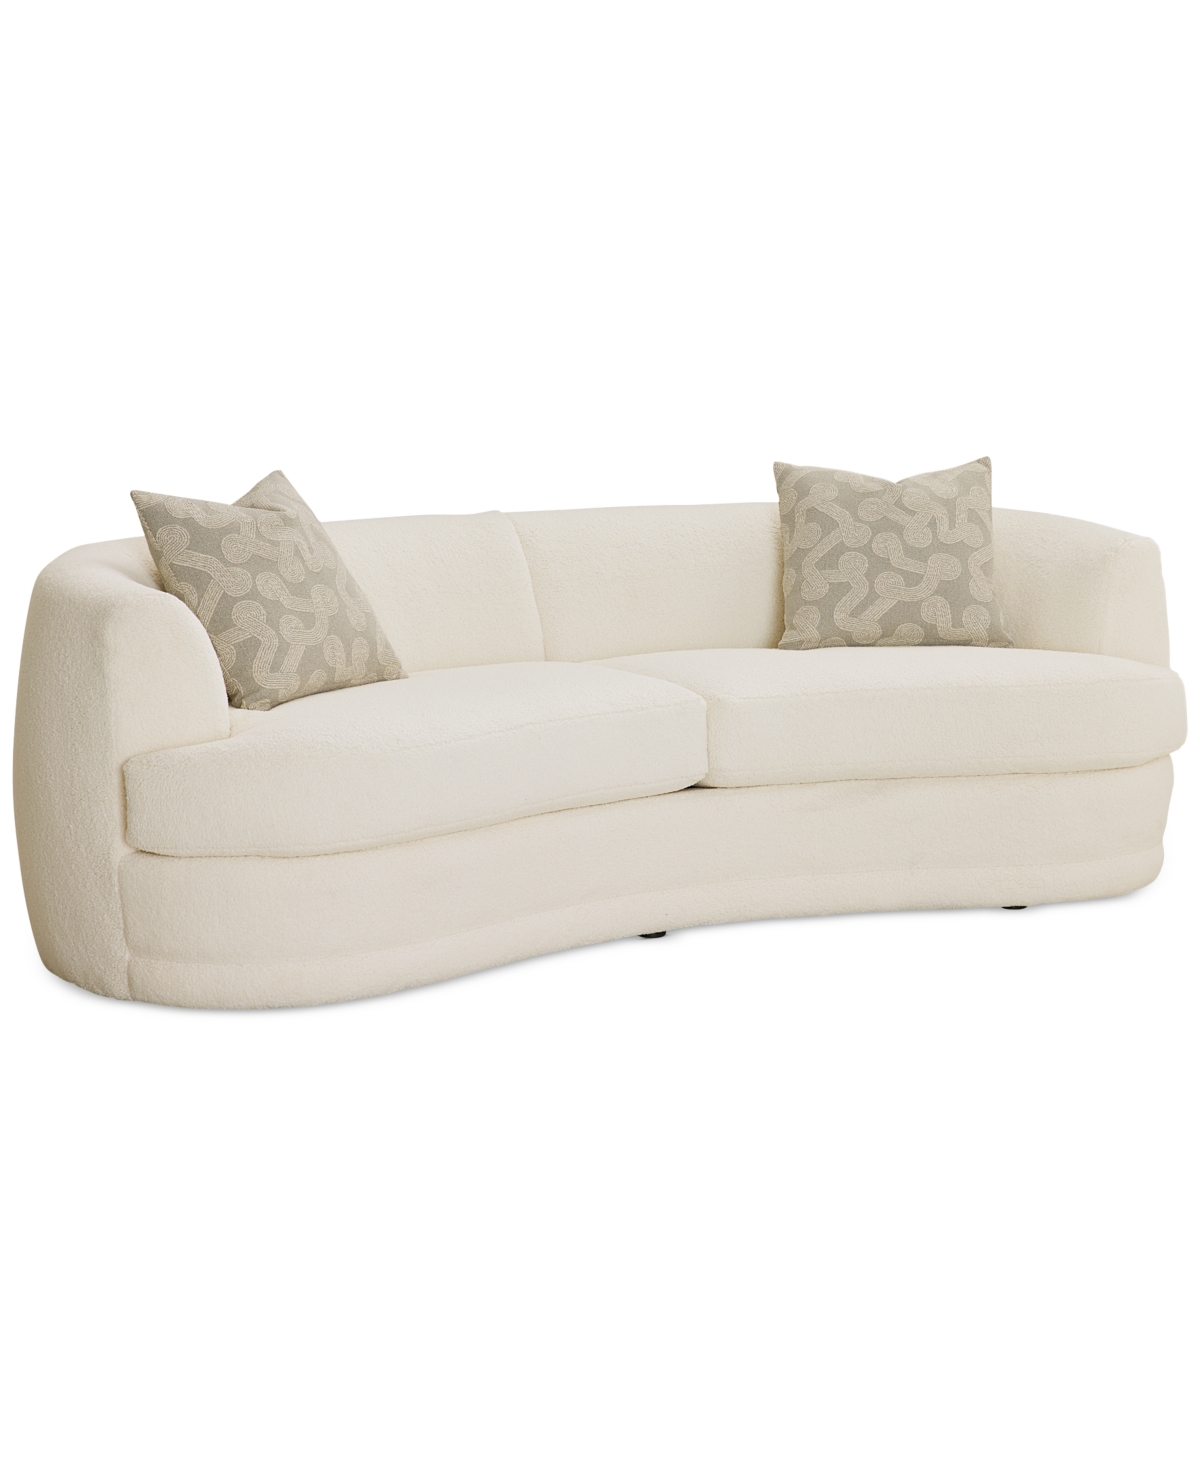 Furniture Jenselle 97" Curved Fabric Estate Sofa, Created For Macy's In Cream